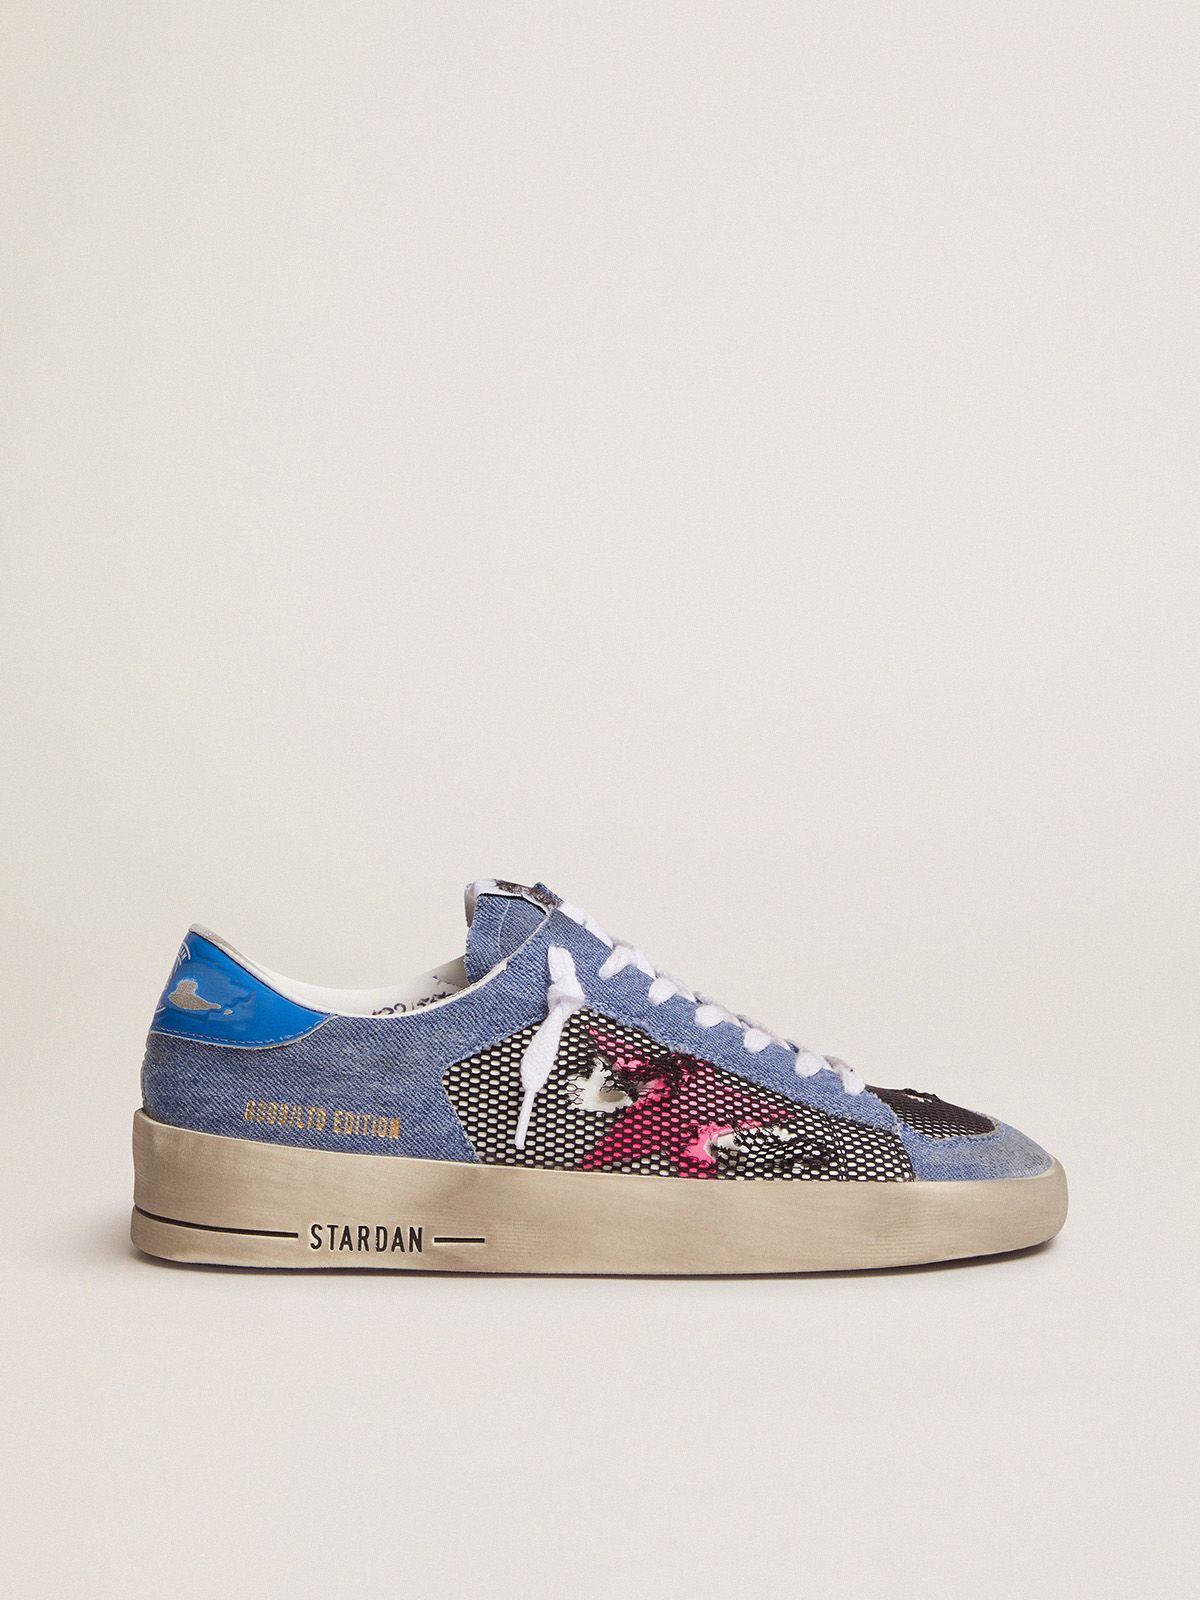 golden goose sneakers denim Stardan with Edition star fuchsia LAB Women's Limited